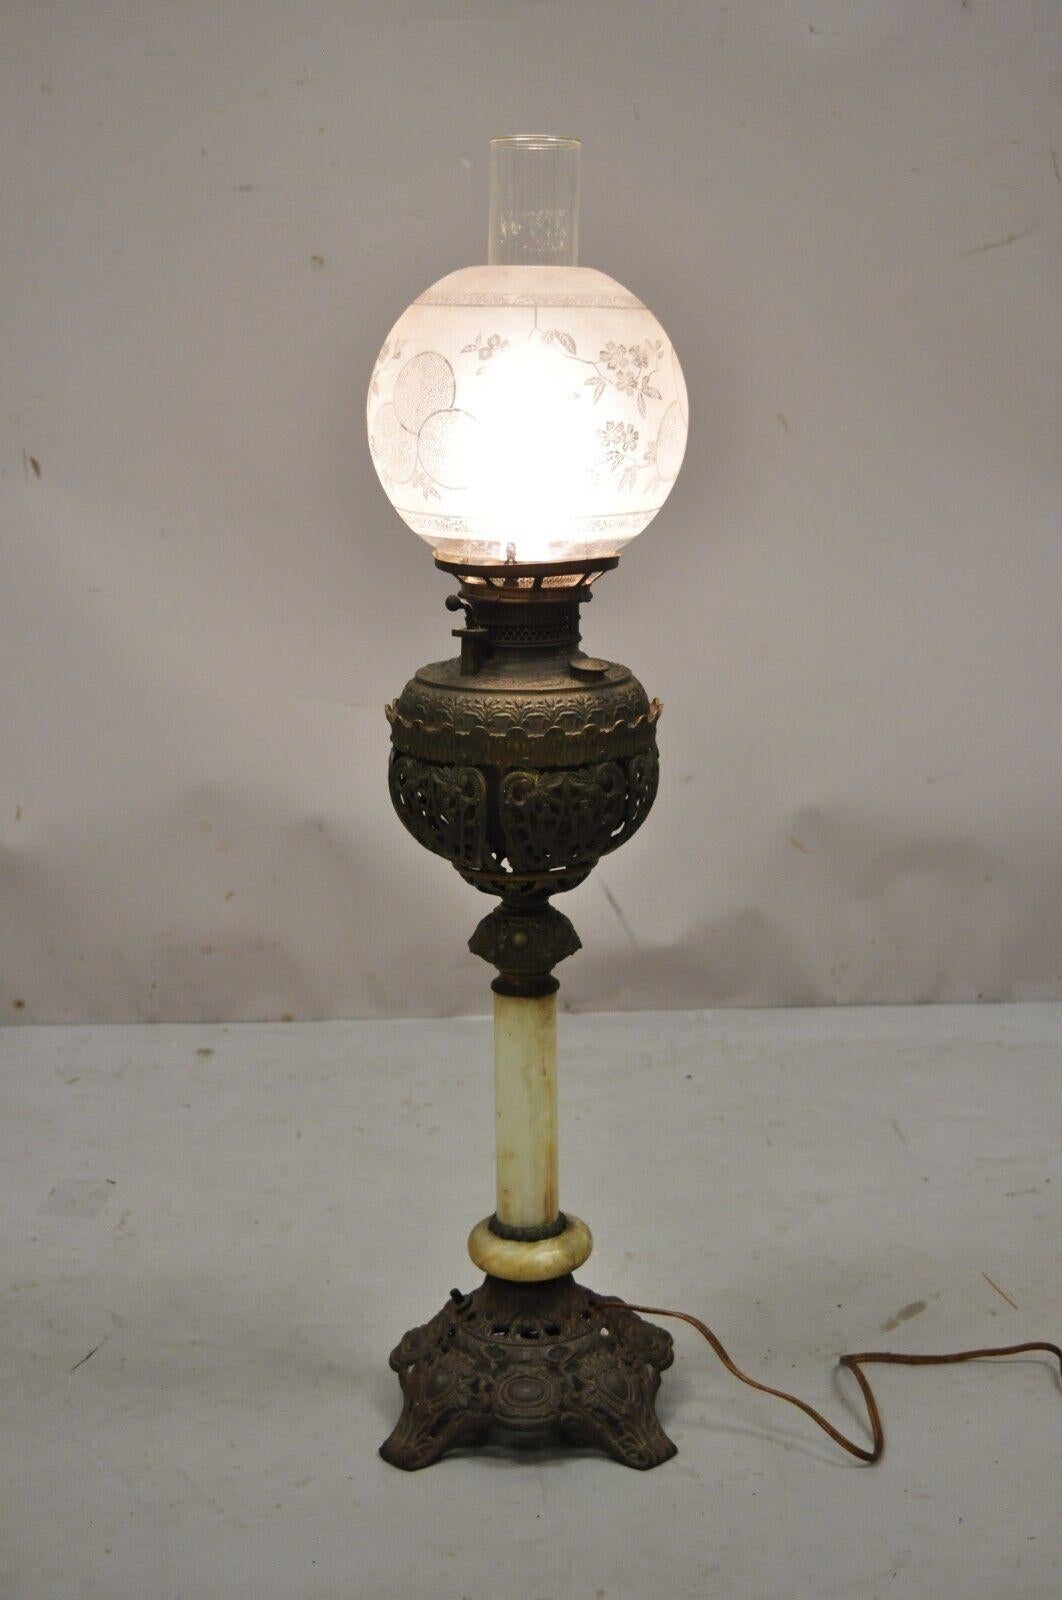 Antique Victorian Bronze Converted Oil Lamp Table Lamp Alabaster Shaft. item features alabaster shaft, pierce decorated bronze, glass shade with floral decoration and glass chute, very nice antique item. Circa 19th Century. Measurements: 31